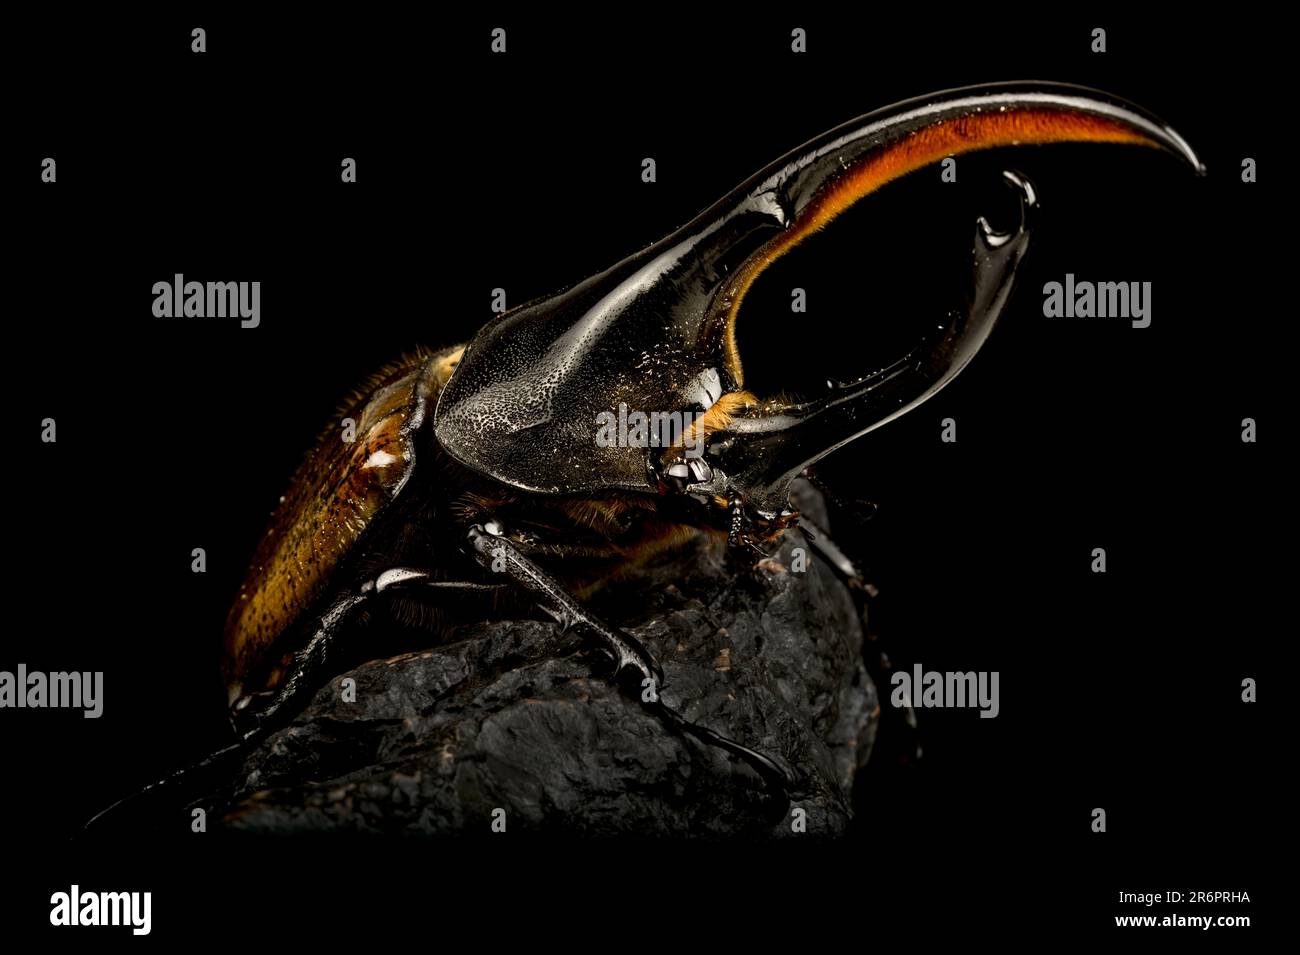 The Hercules beetle (Dynastes hercules) is the second biggest beetle species in the world. Stock Photo